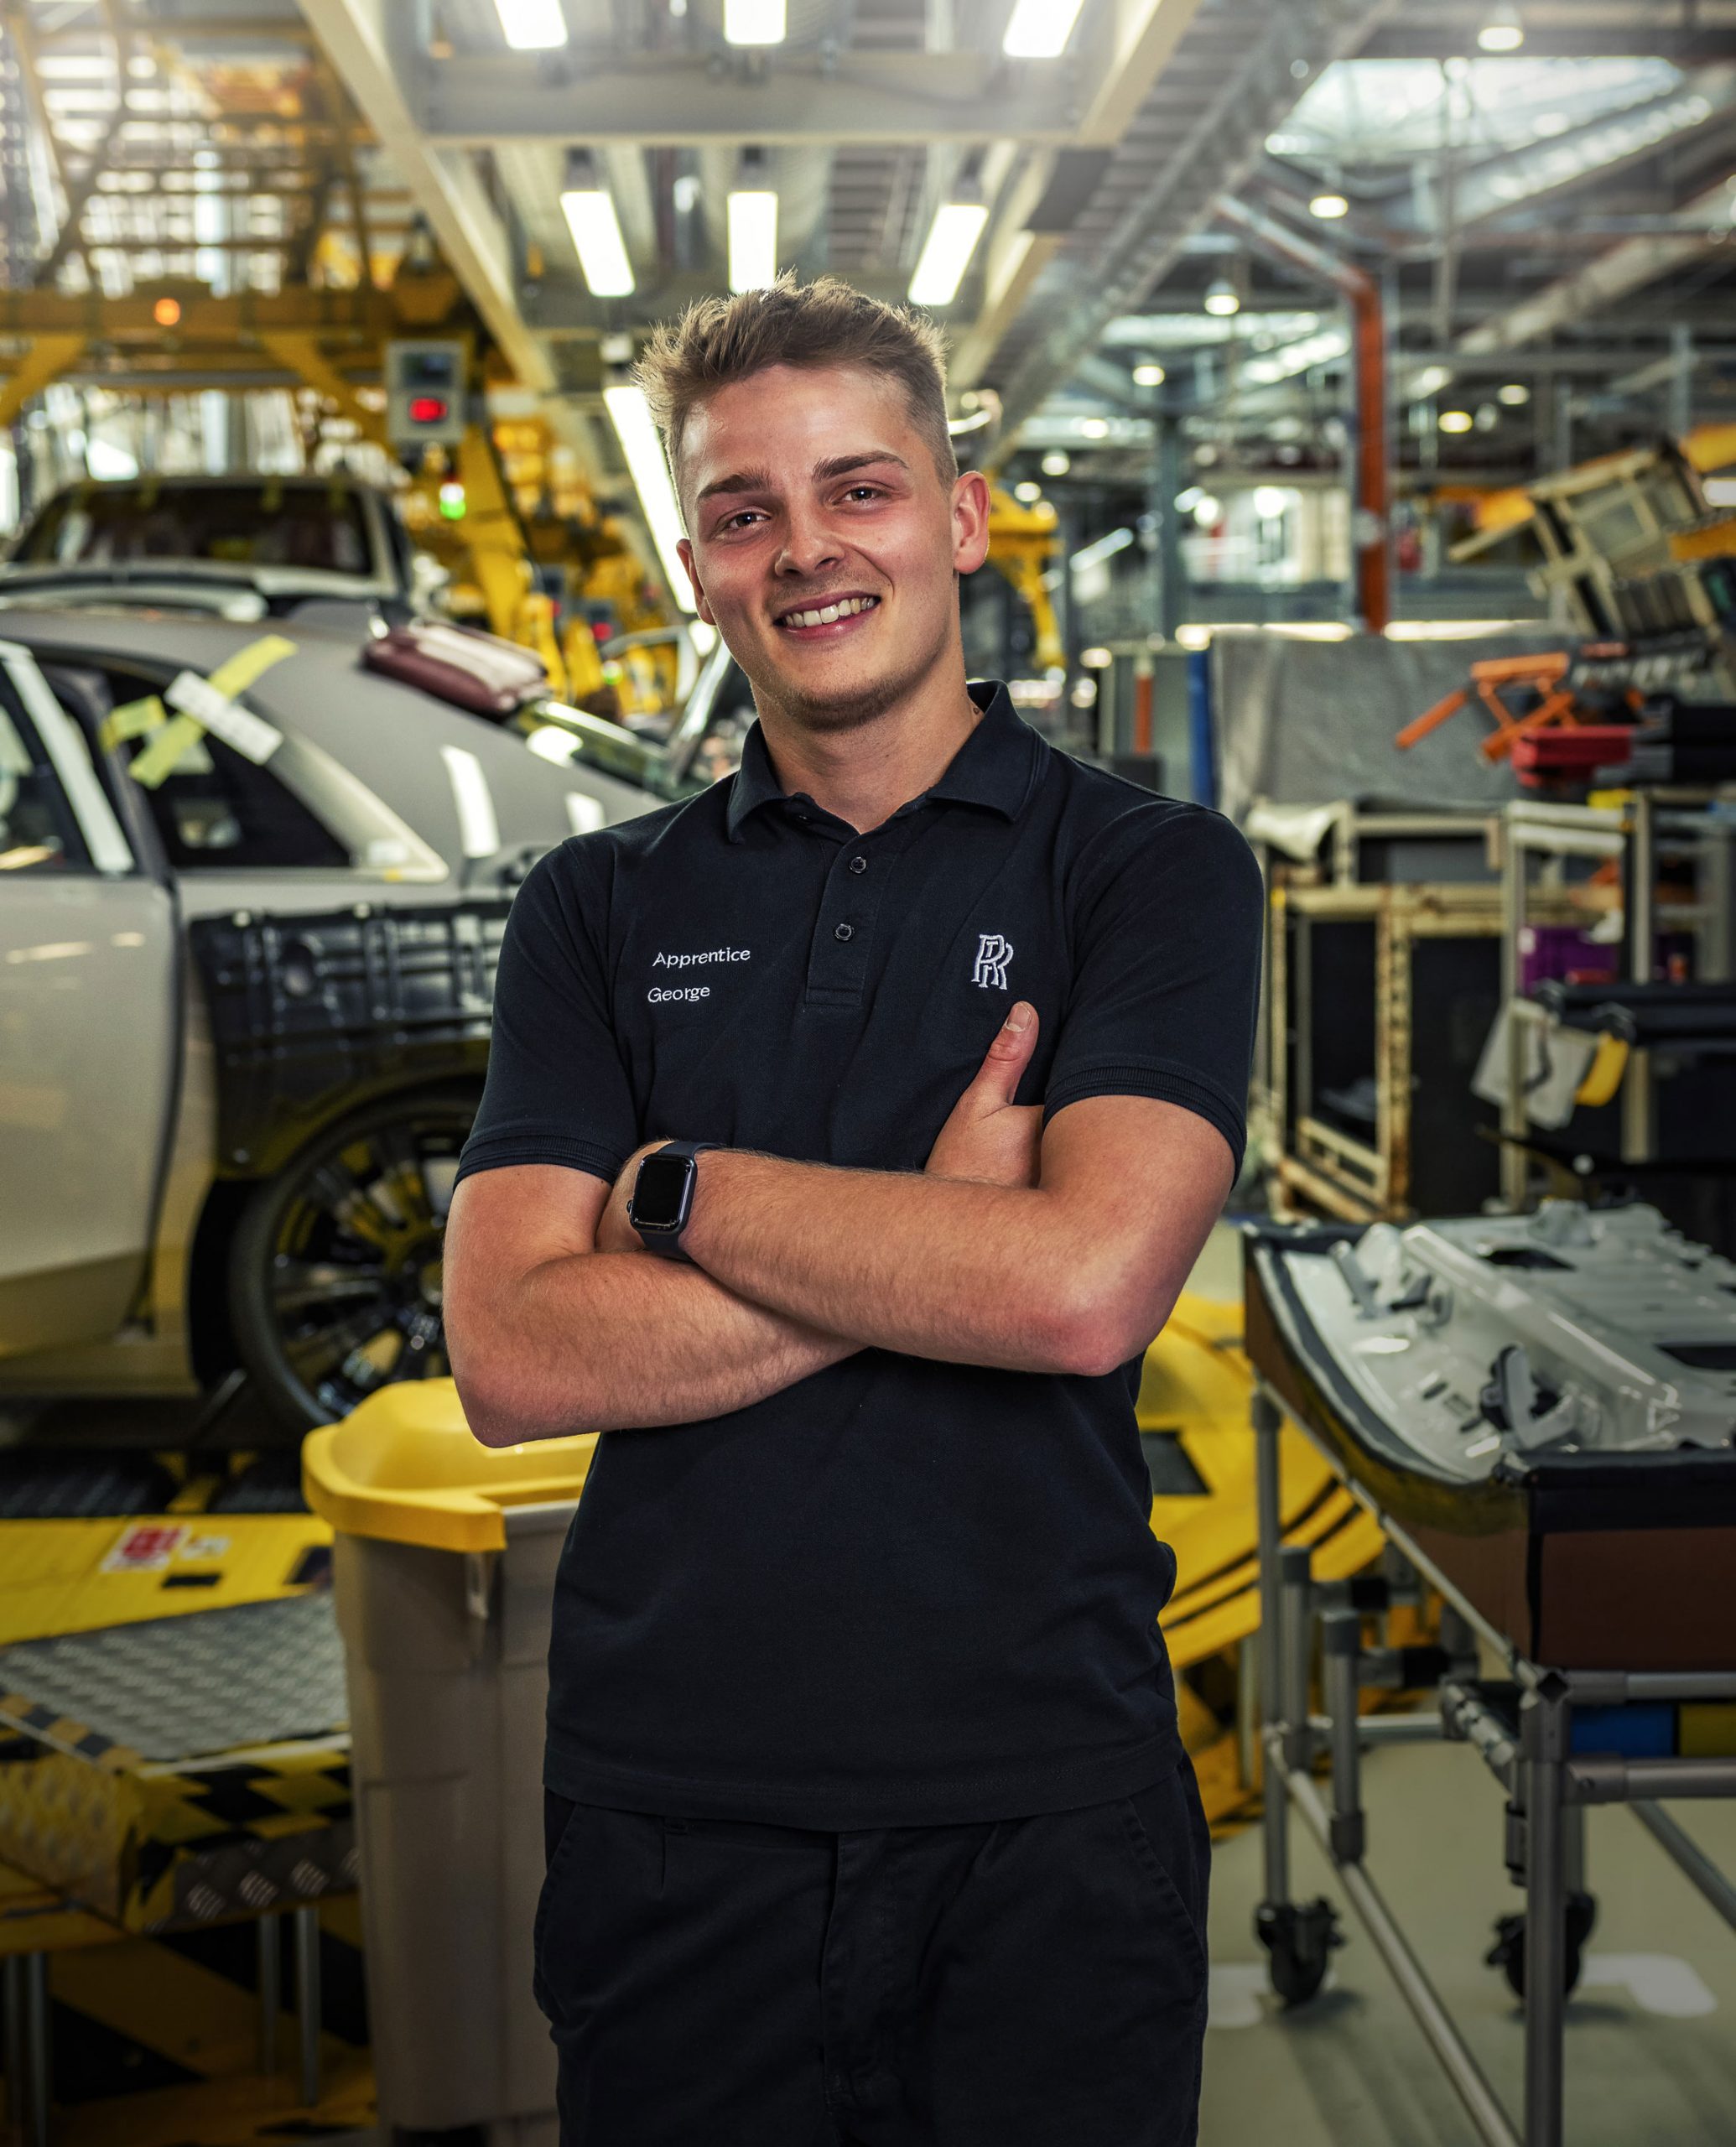 Young male apprentice from Rolls-Royce Motor Cars exudes confidence and pride while working on the production line. Folding his arms and with a happy expression on his face, he stands in front of the luxury vehicles he helps produce, showcasing the skilled craftsmanship of the company.